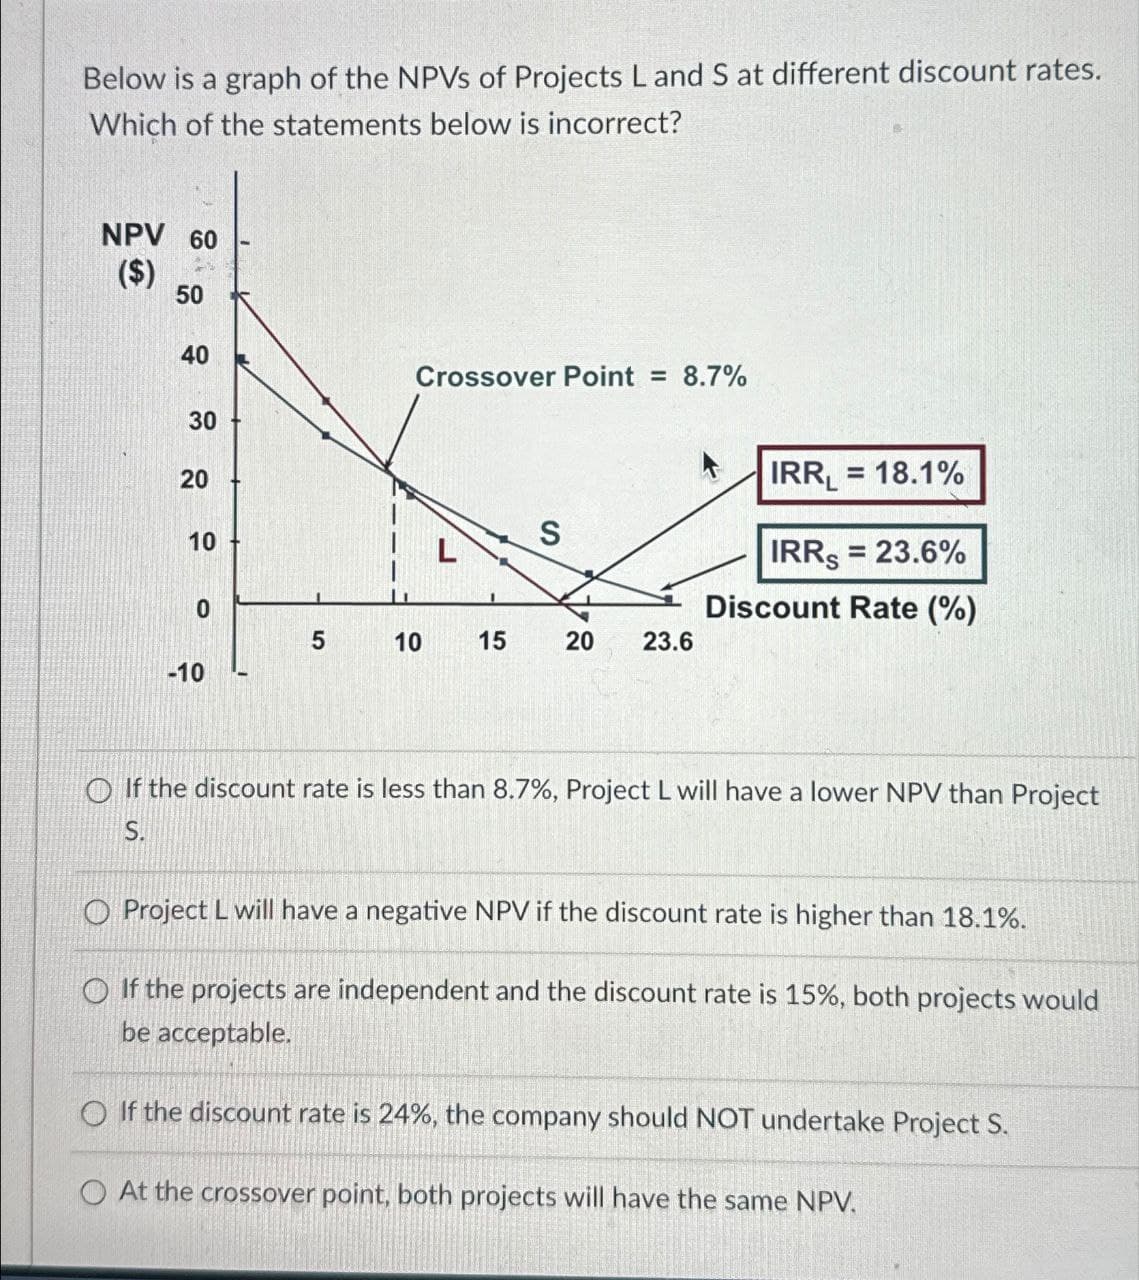 Below is a graph of the NPVS of Projects L and S at different discount rates.
Which of the statements below is incorrect?
NPV 60
($)
50
40
30
32
20
10
Crossover Point = 8.7%
S
0
5
10
15
20
20
-10
IRRL = 18.1%
IRRS = 23.6%
Discount Rate (%)
23.6
If the discount rate is less than 8.7%, Project L will have a lower NPV than Project
S.
O Project L will have a negative NPV if the discount rate is higher than 18.1%.
If the projects are independent and the discount rate is 15%, both projects would
be acceptable.
If the discount rate is 24%, the company should NOT undertake Project S.
At the crossover point, both projects will have the same NPV.